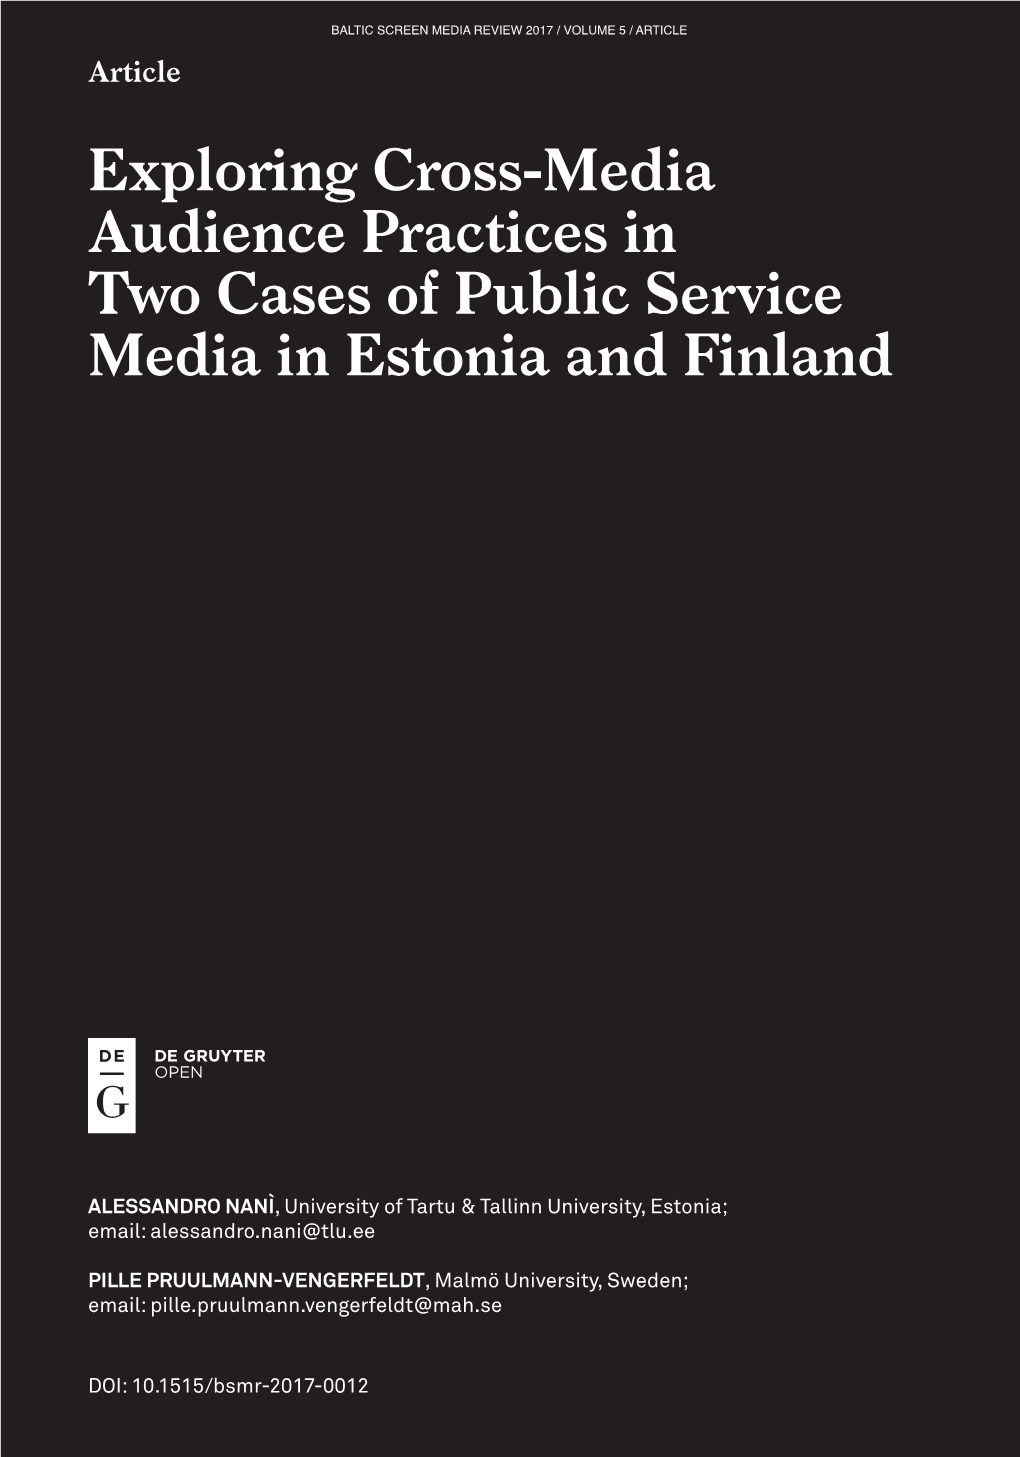 Exploring Cross-Media Audience Practices in Two Cases of Public Service Media in Estonia and Finland